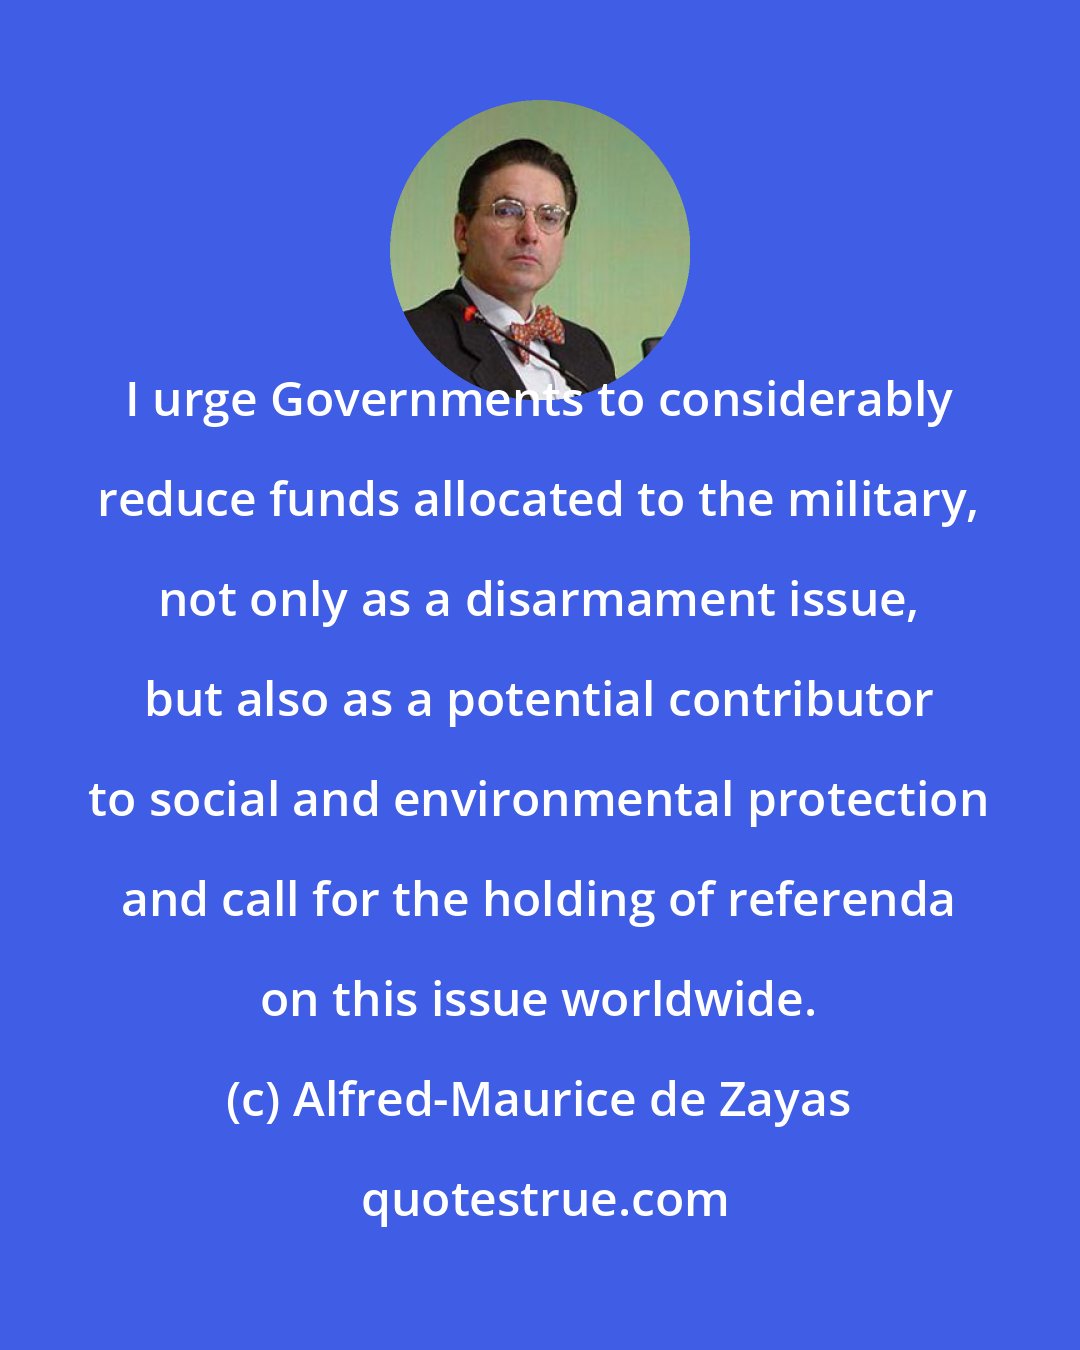 Alfred-Maurice de Zayas: I urge Governments to considerably reduce funds allocated to the military, not only as a disarmament issue, but also as a potential contributor to social and environmental protection and call for the holding of referenda on this issue worldwide.